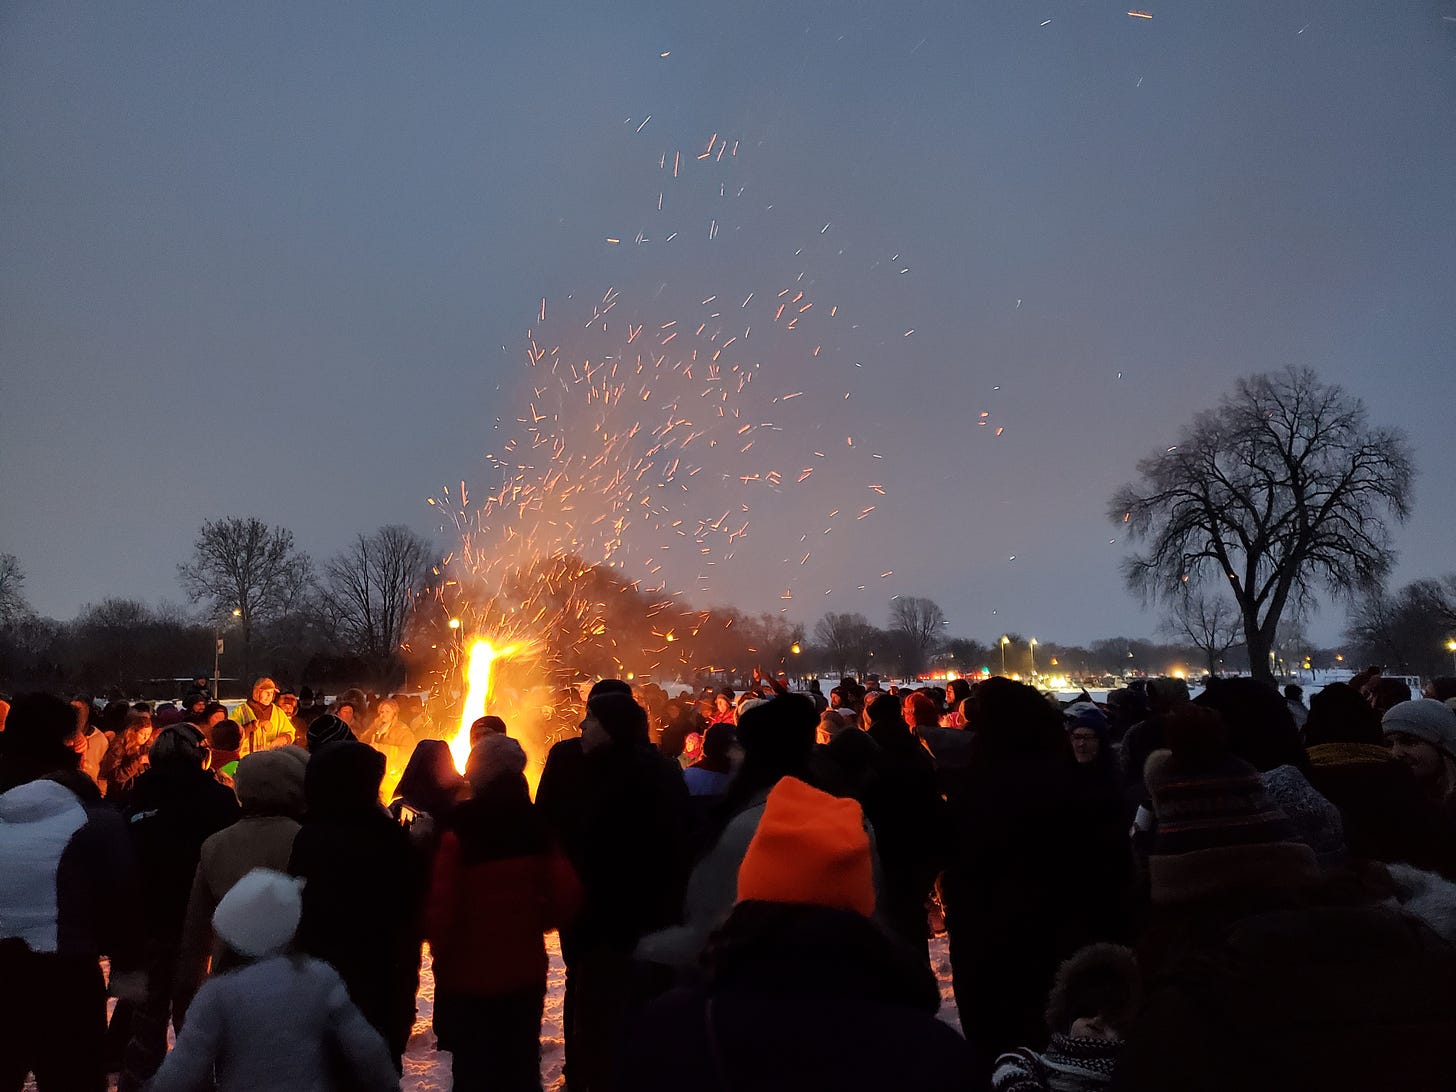 A large group of people stands around a roaring bonfire in the middle of a snowy park.